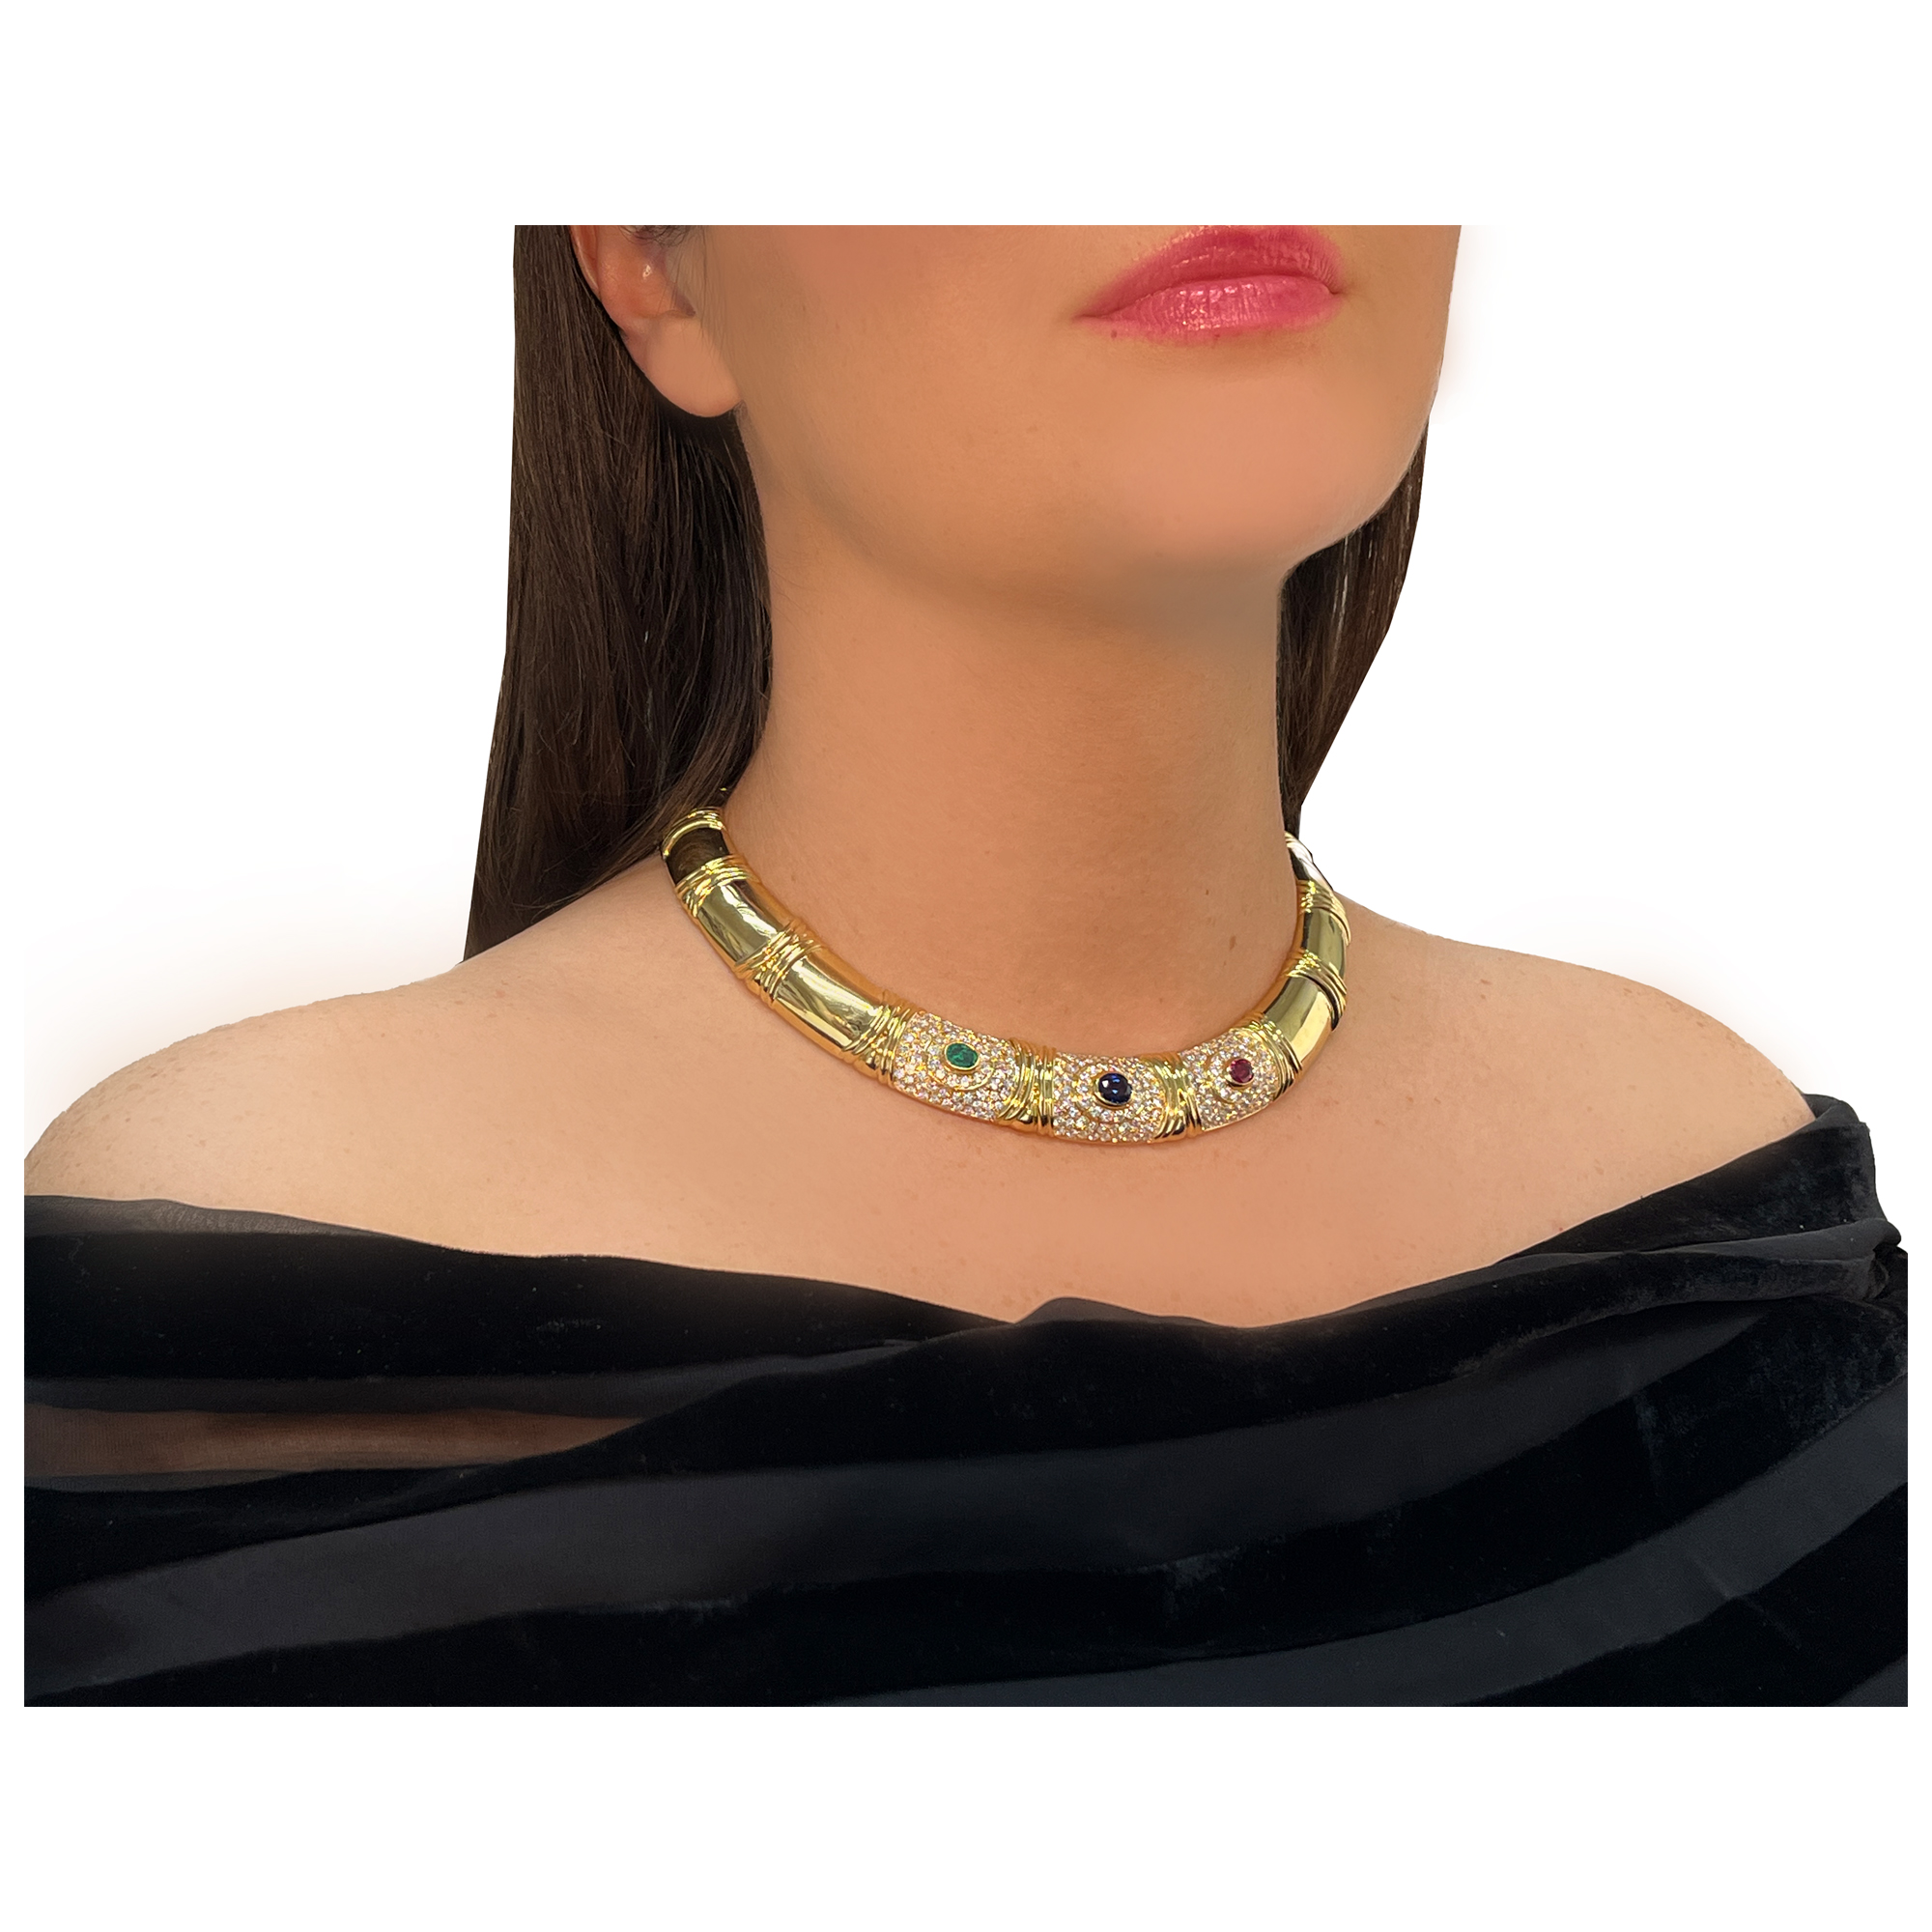 Bvlgari necklace in 18k with diamonds, ruby, emerald and sapphire image 1